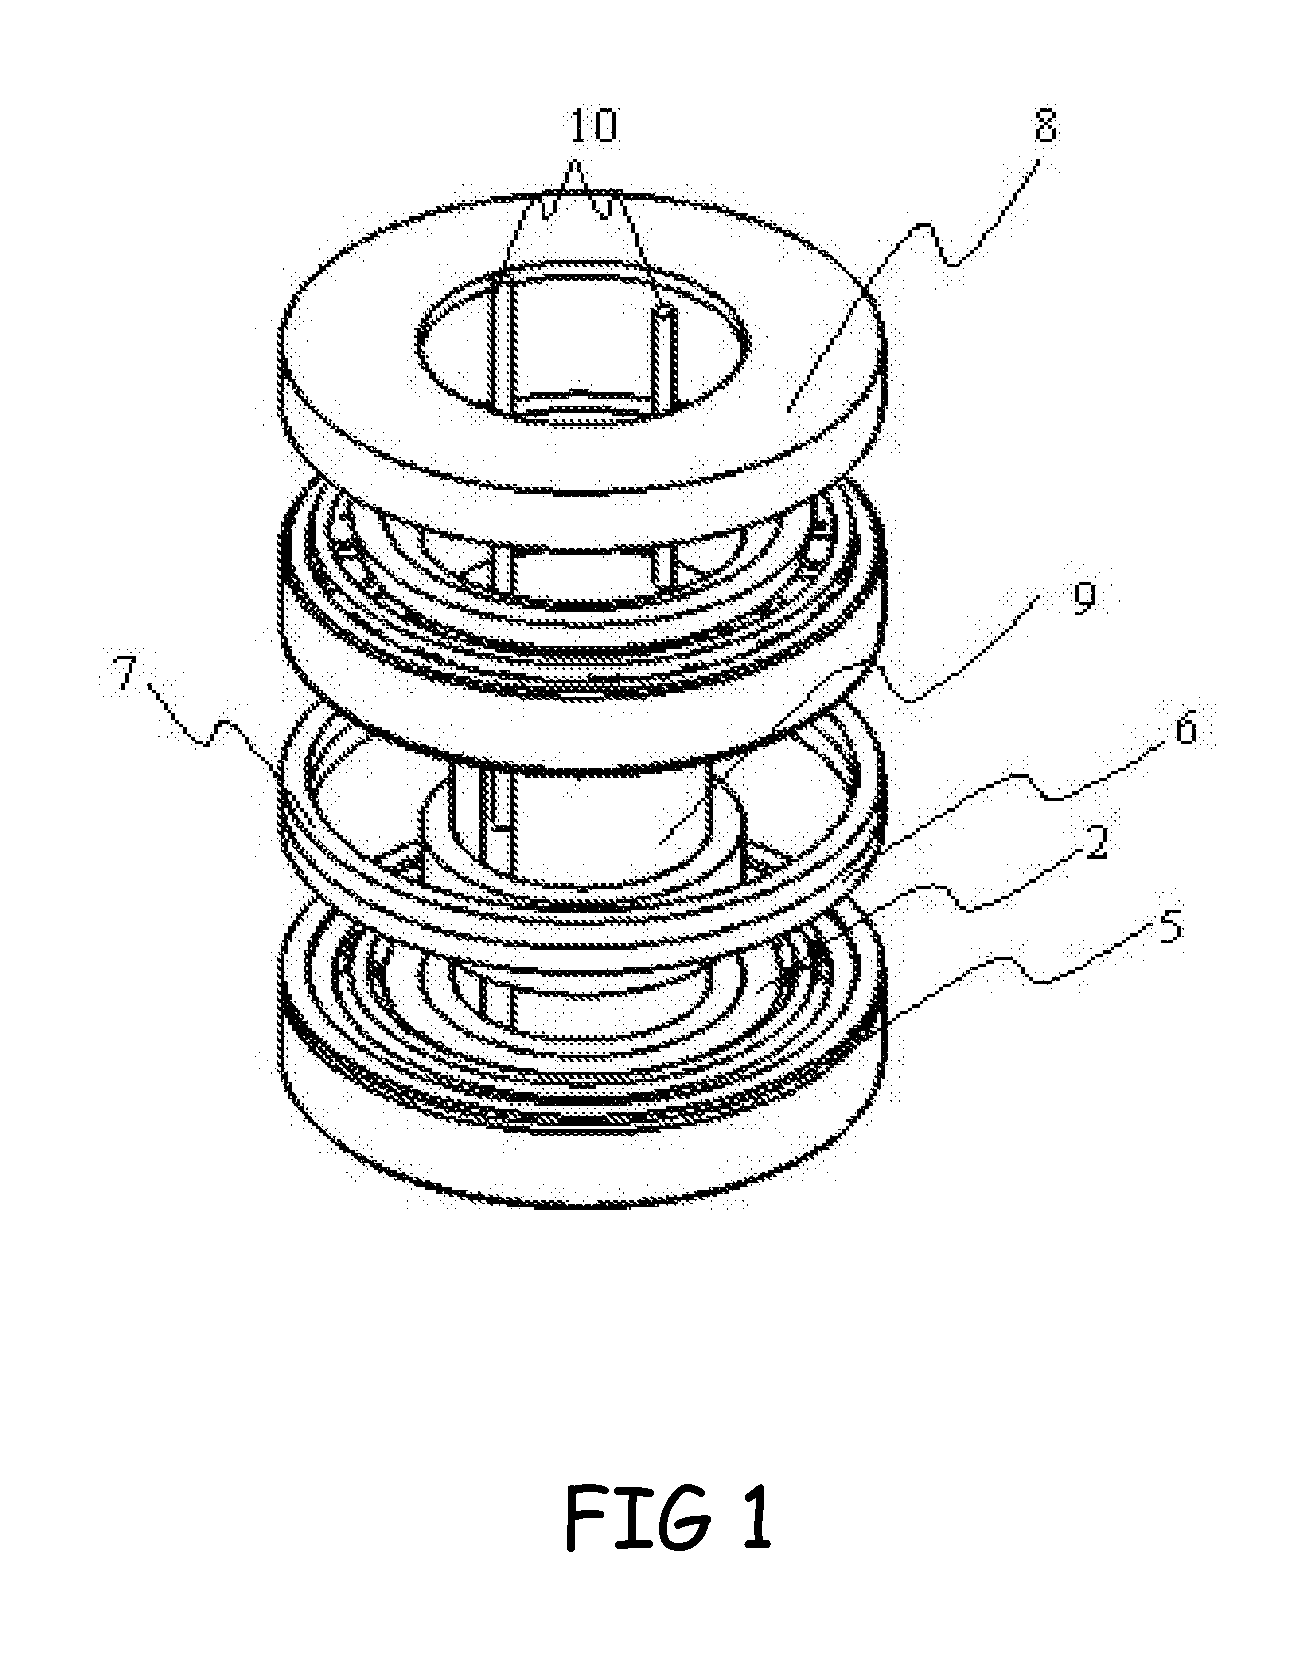 Durable and Wearless Rotating Conductor Assembly Based on an Internal Magnetic Field for Transmitting Voltage and Current